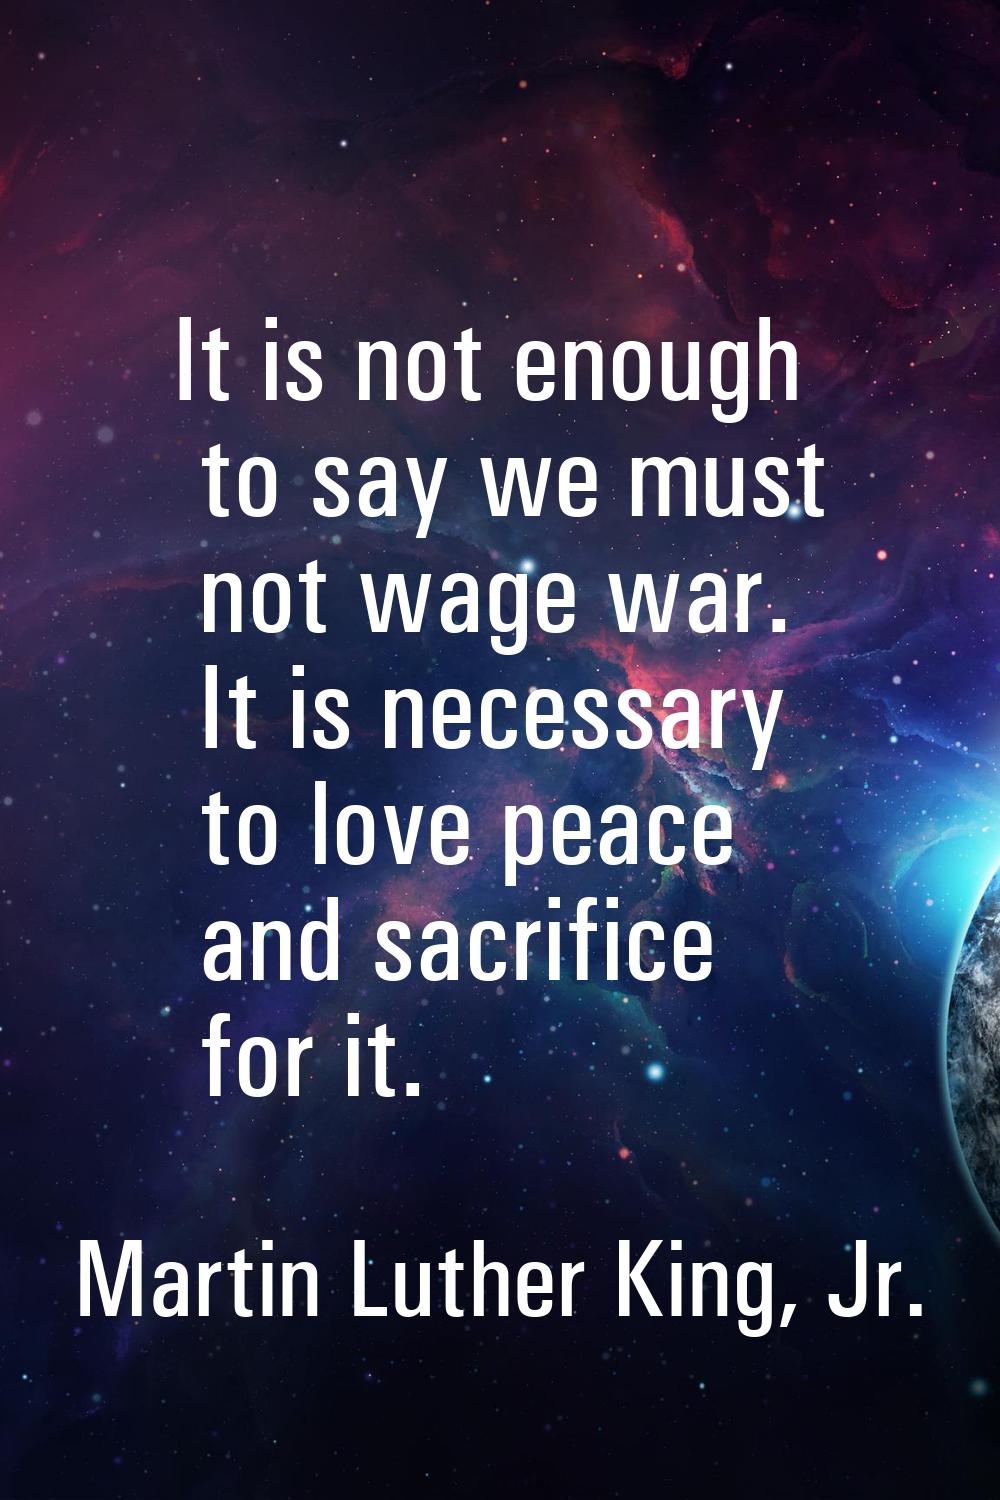 It is not enough to say we must not wage war. It is necessary to love peace and sacrifice for it.